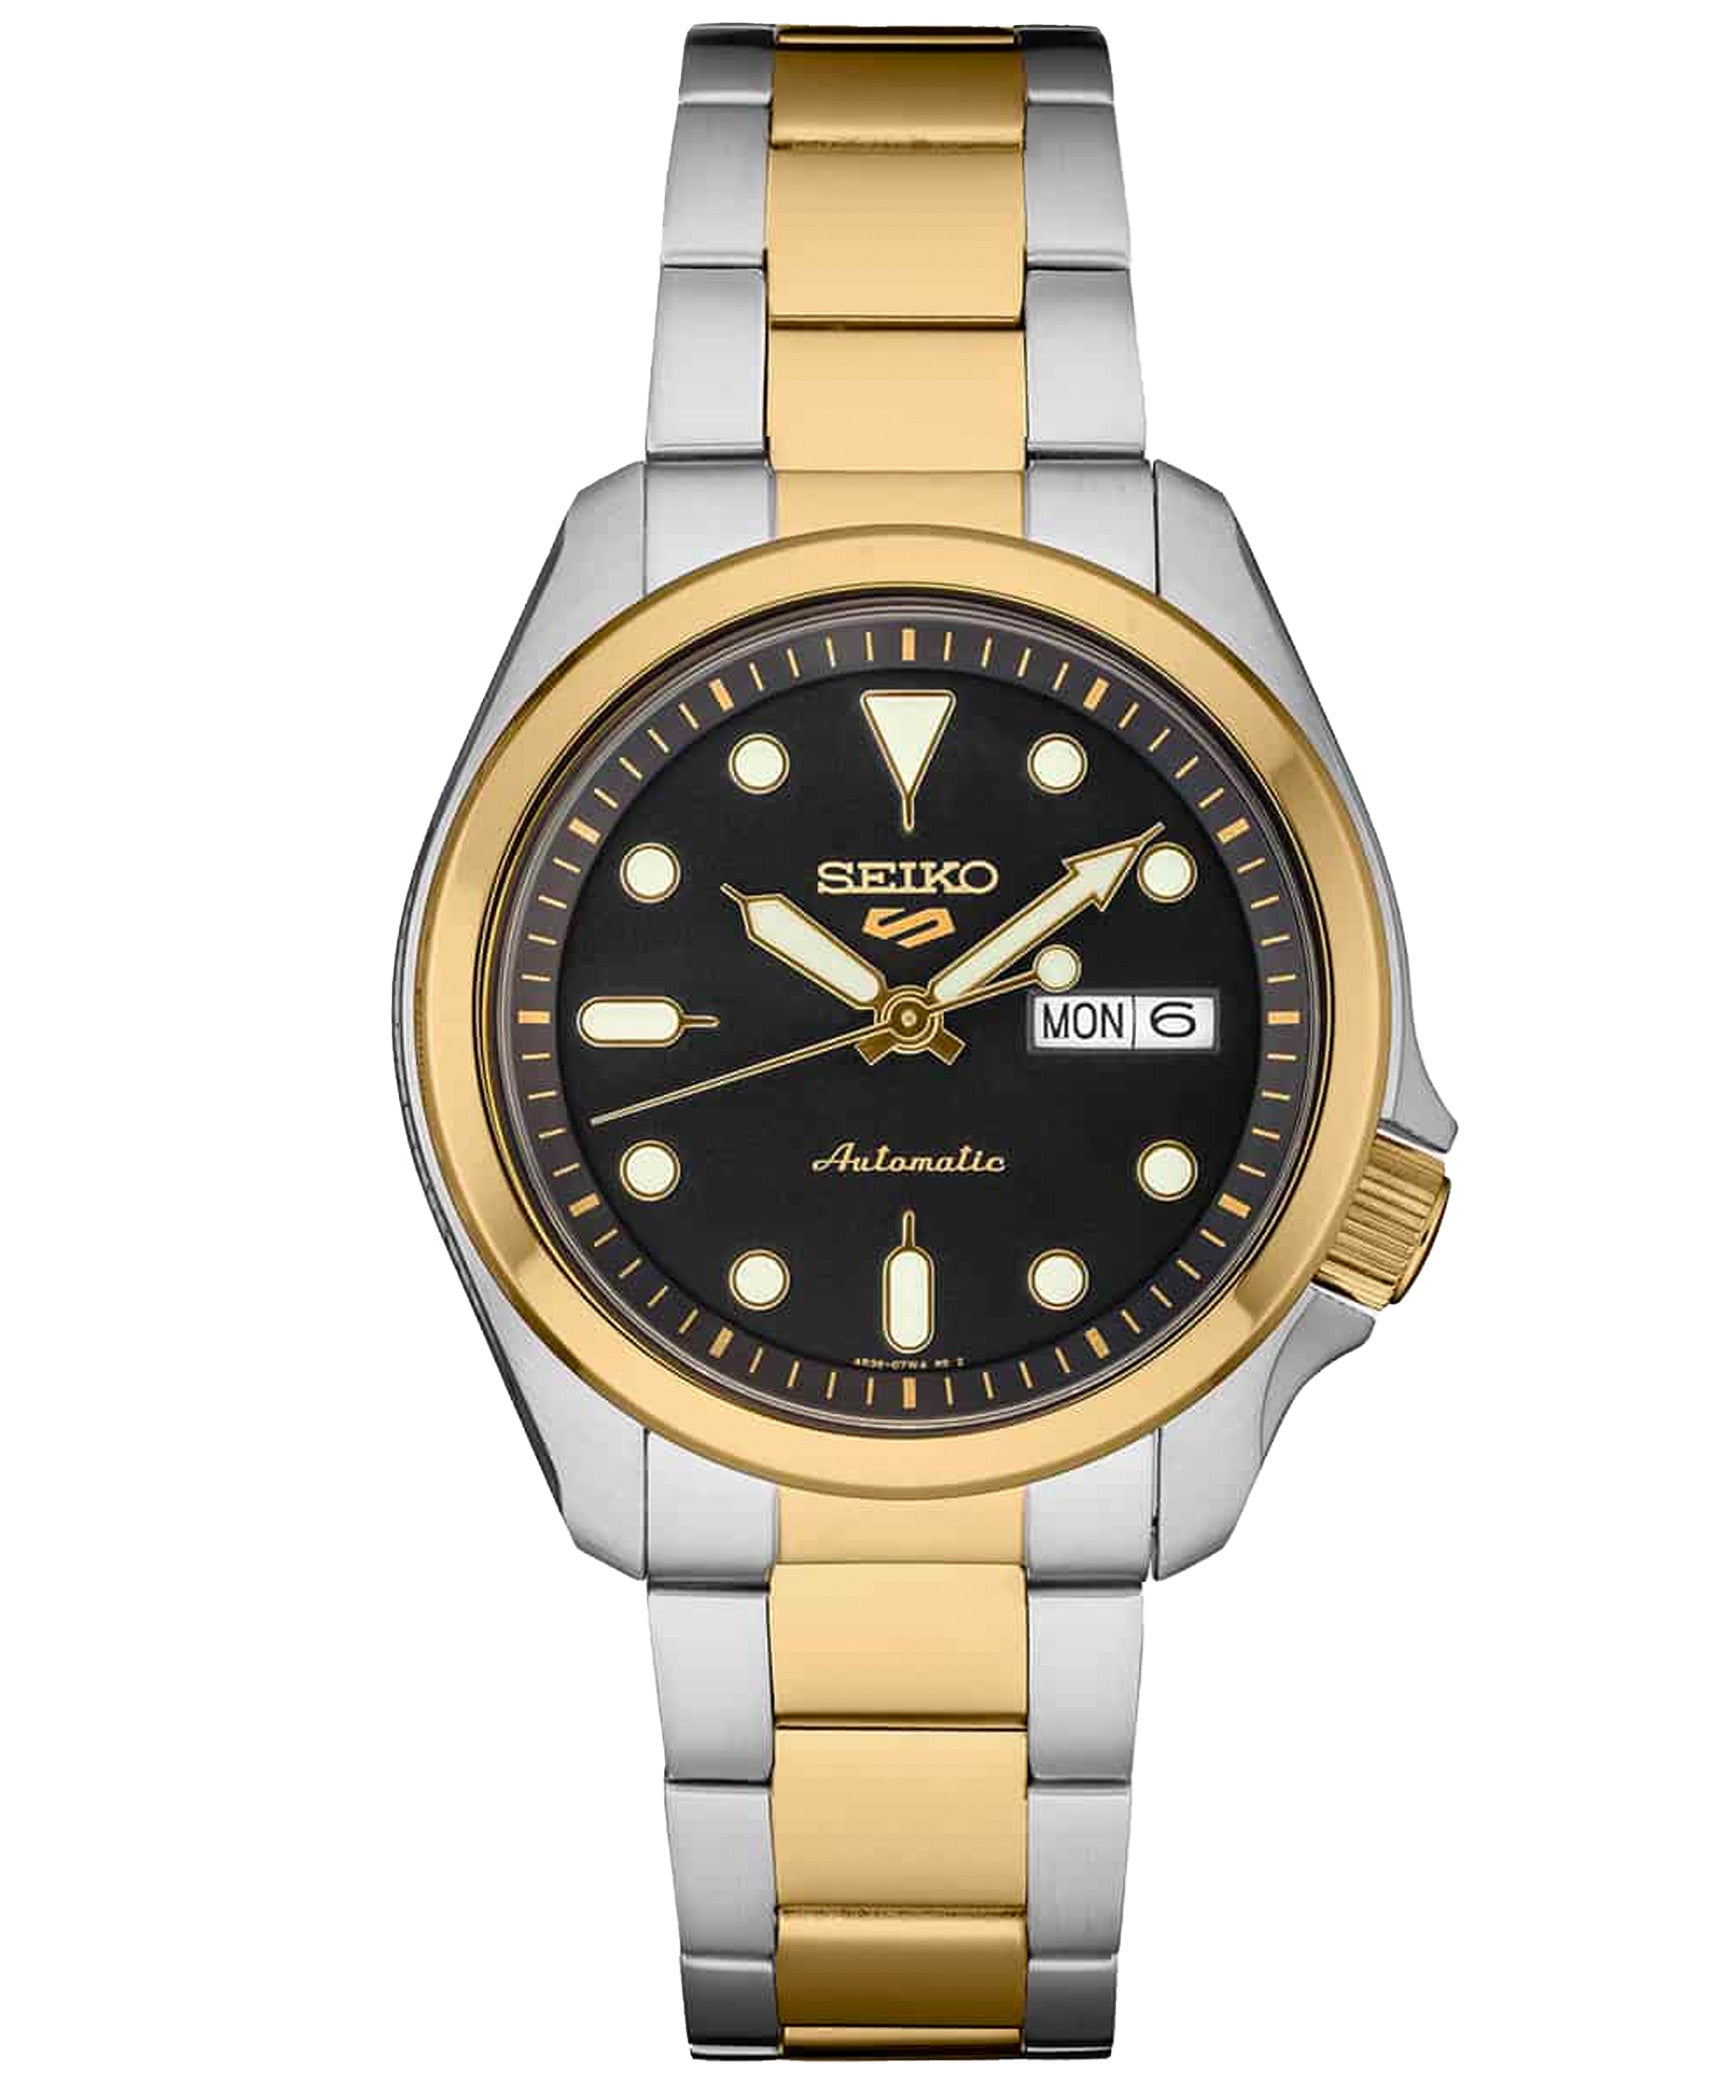 Seiko Men's  Mechanical Watch, Automatic 100m Water Resistance, Black Dial Silver & Gold Stainless Band, SRPE60K